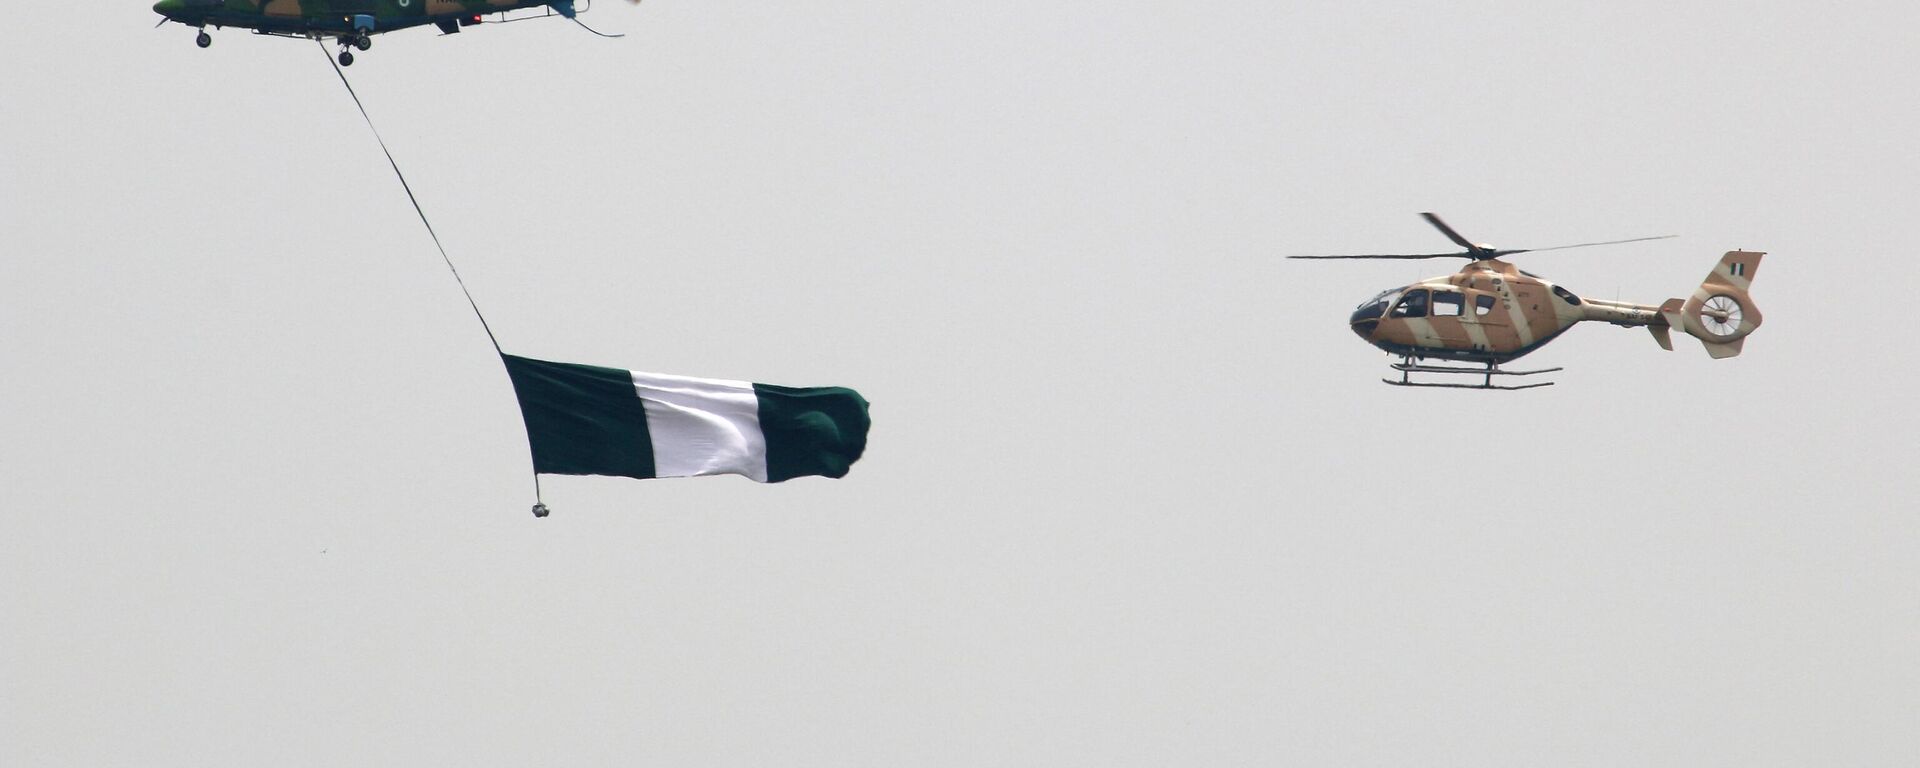 Nigerian Air Force helicopters perfom with the flag of Nigeria during a parade marking the country's 58th anniversary of independence, on October 1, 2018, on Eagle Square in Abuja. - Sputnik International, 1920, 09.12.2022